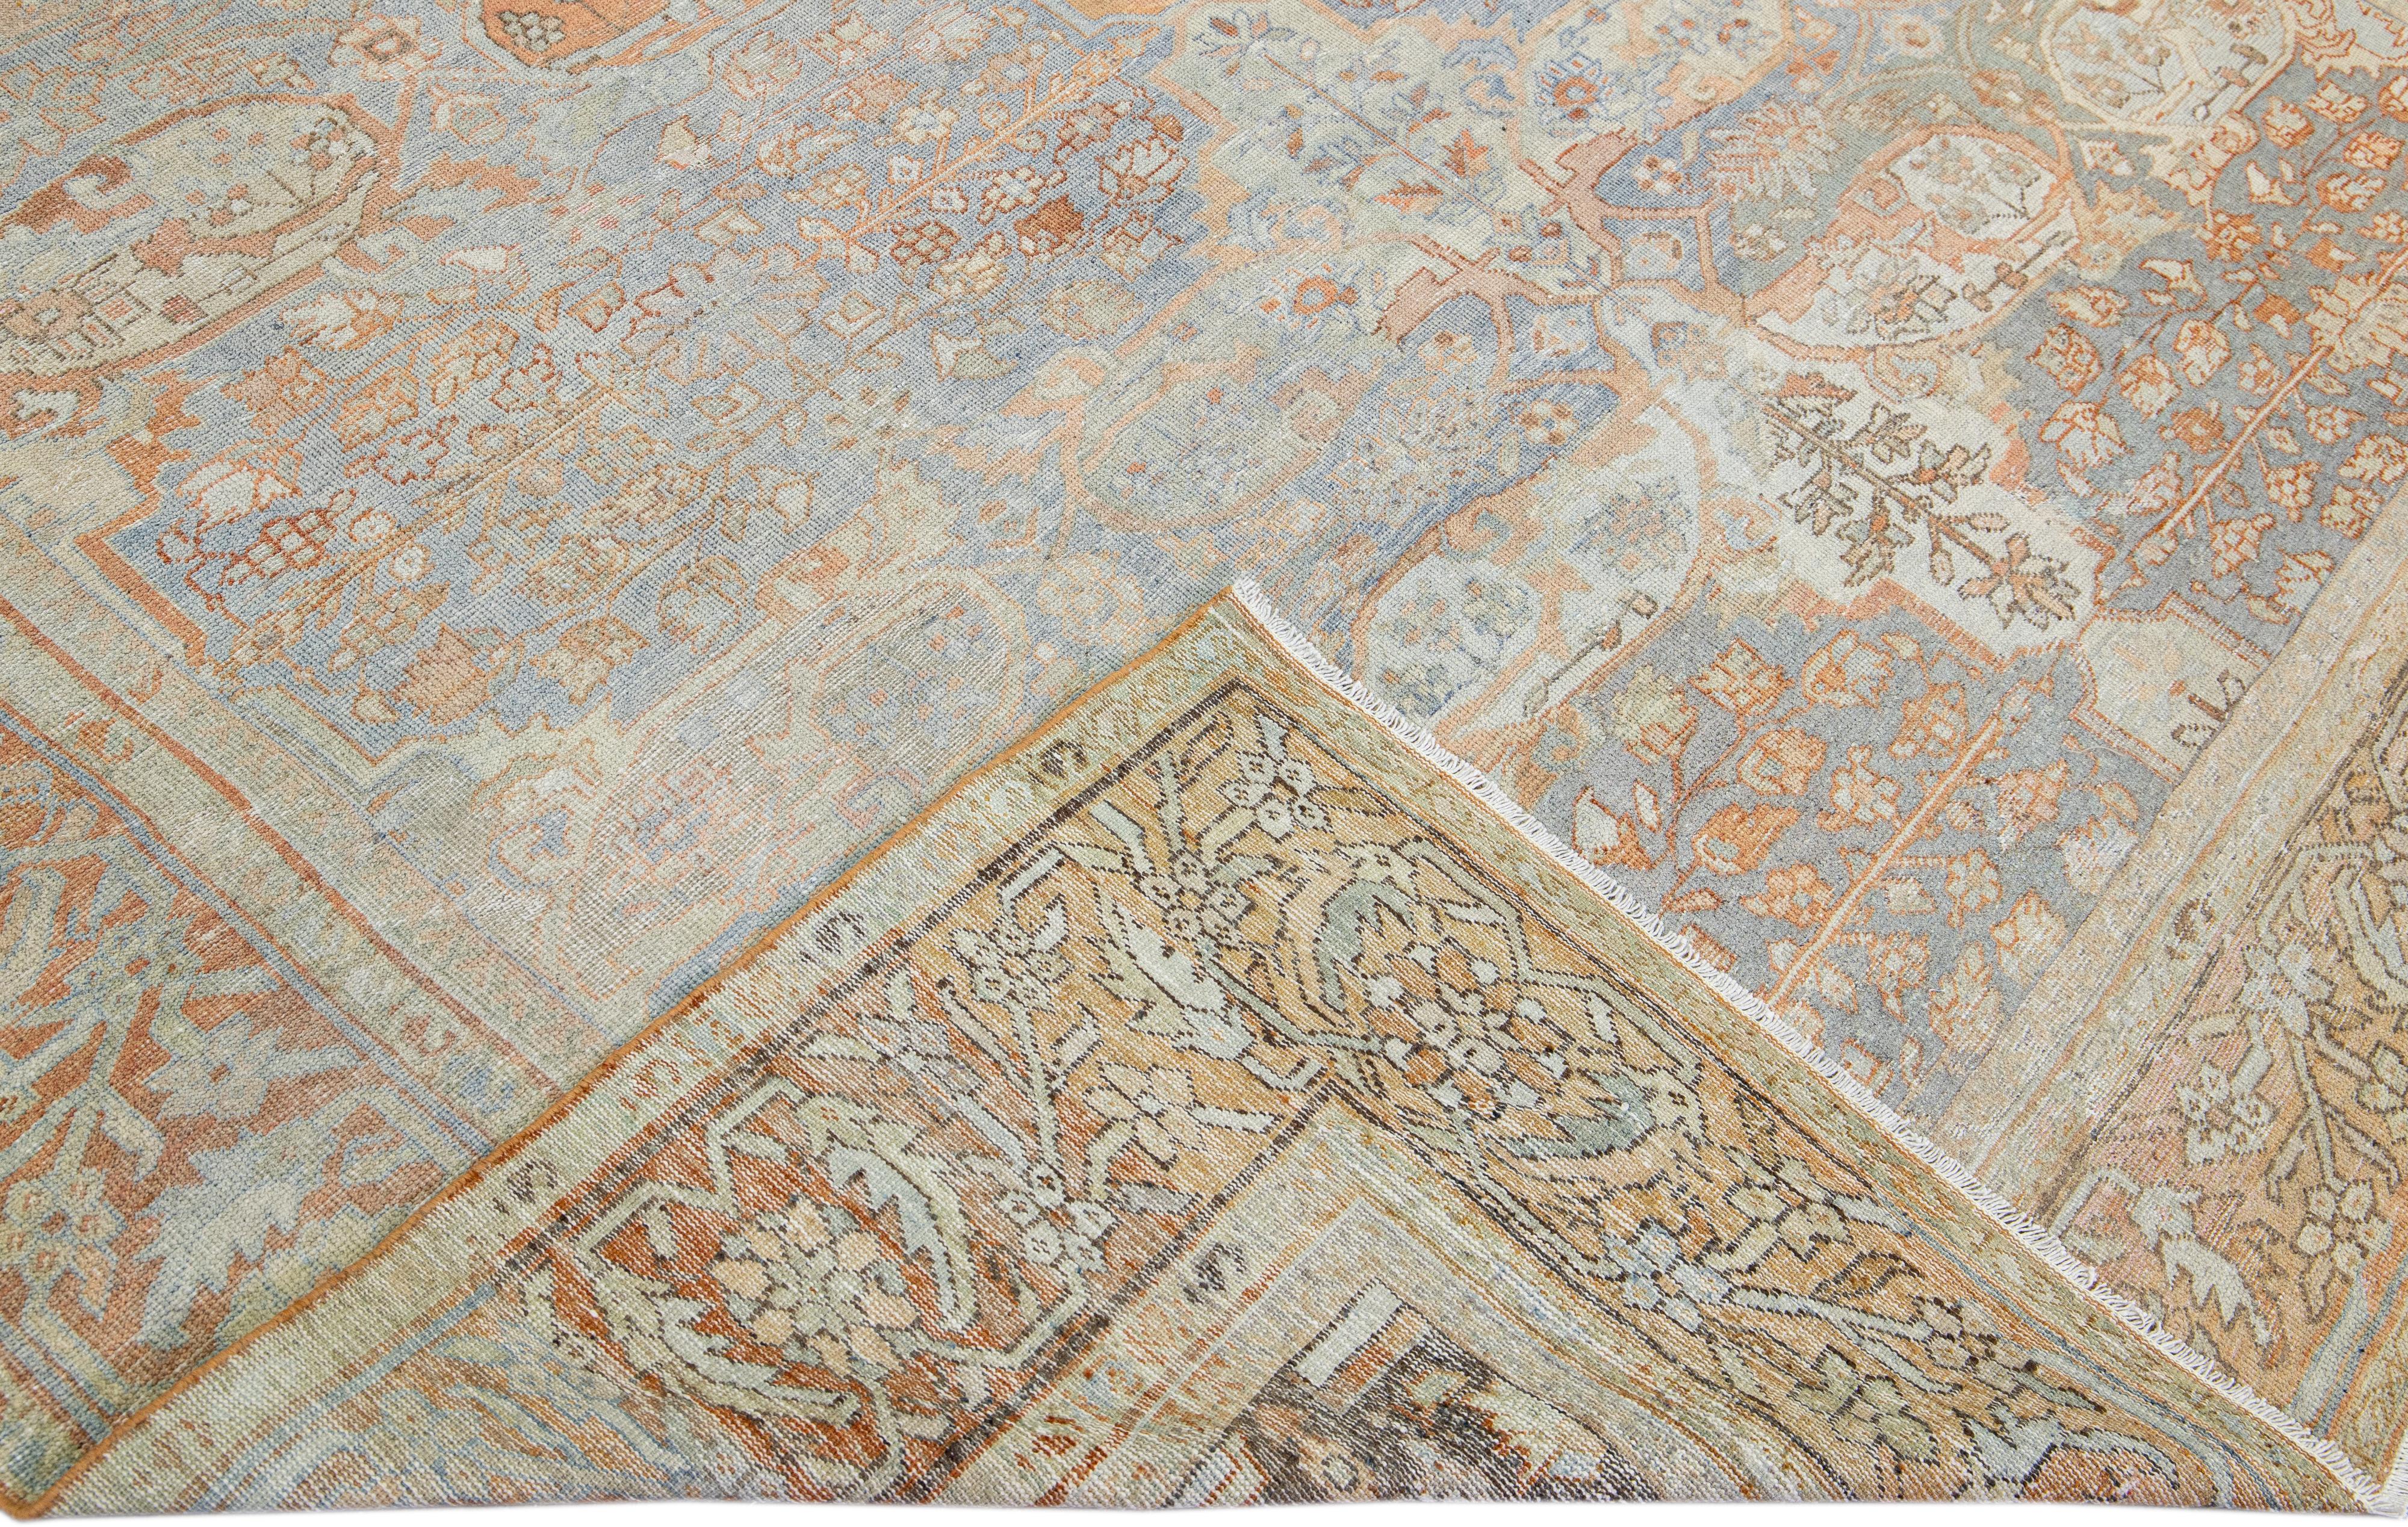 Beautiful antique Persian Sultanabad hand-knotted wool rug with a light blue field. This piece has a rusted designed frame and multicolor accents in a gorgeous all-over floral pattern design.

This rug measures: 8'7